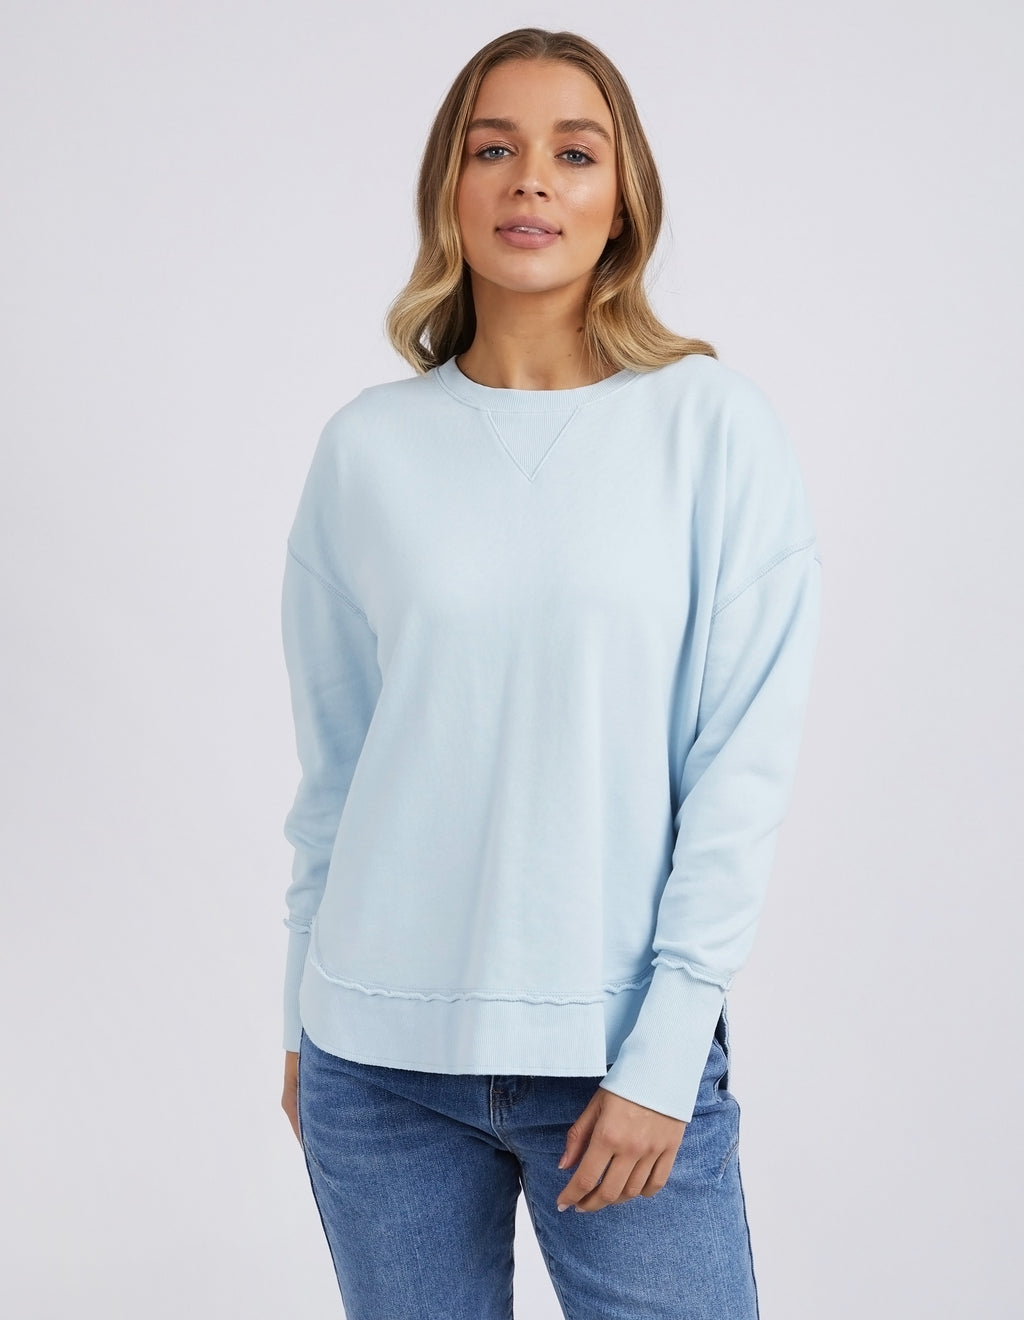 delilah crew by foxwood is a unbrushed fleece sweater in sky blue